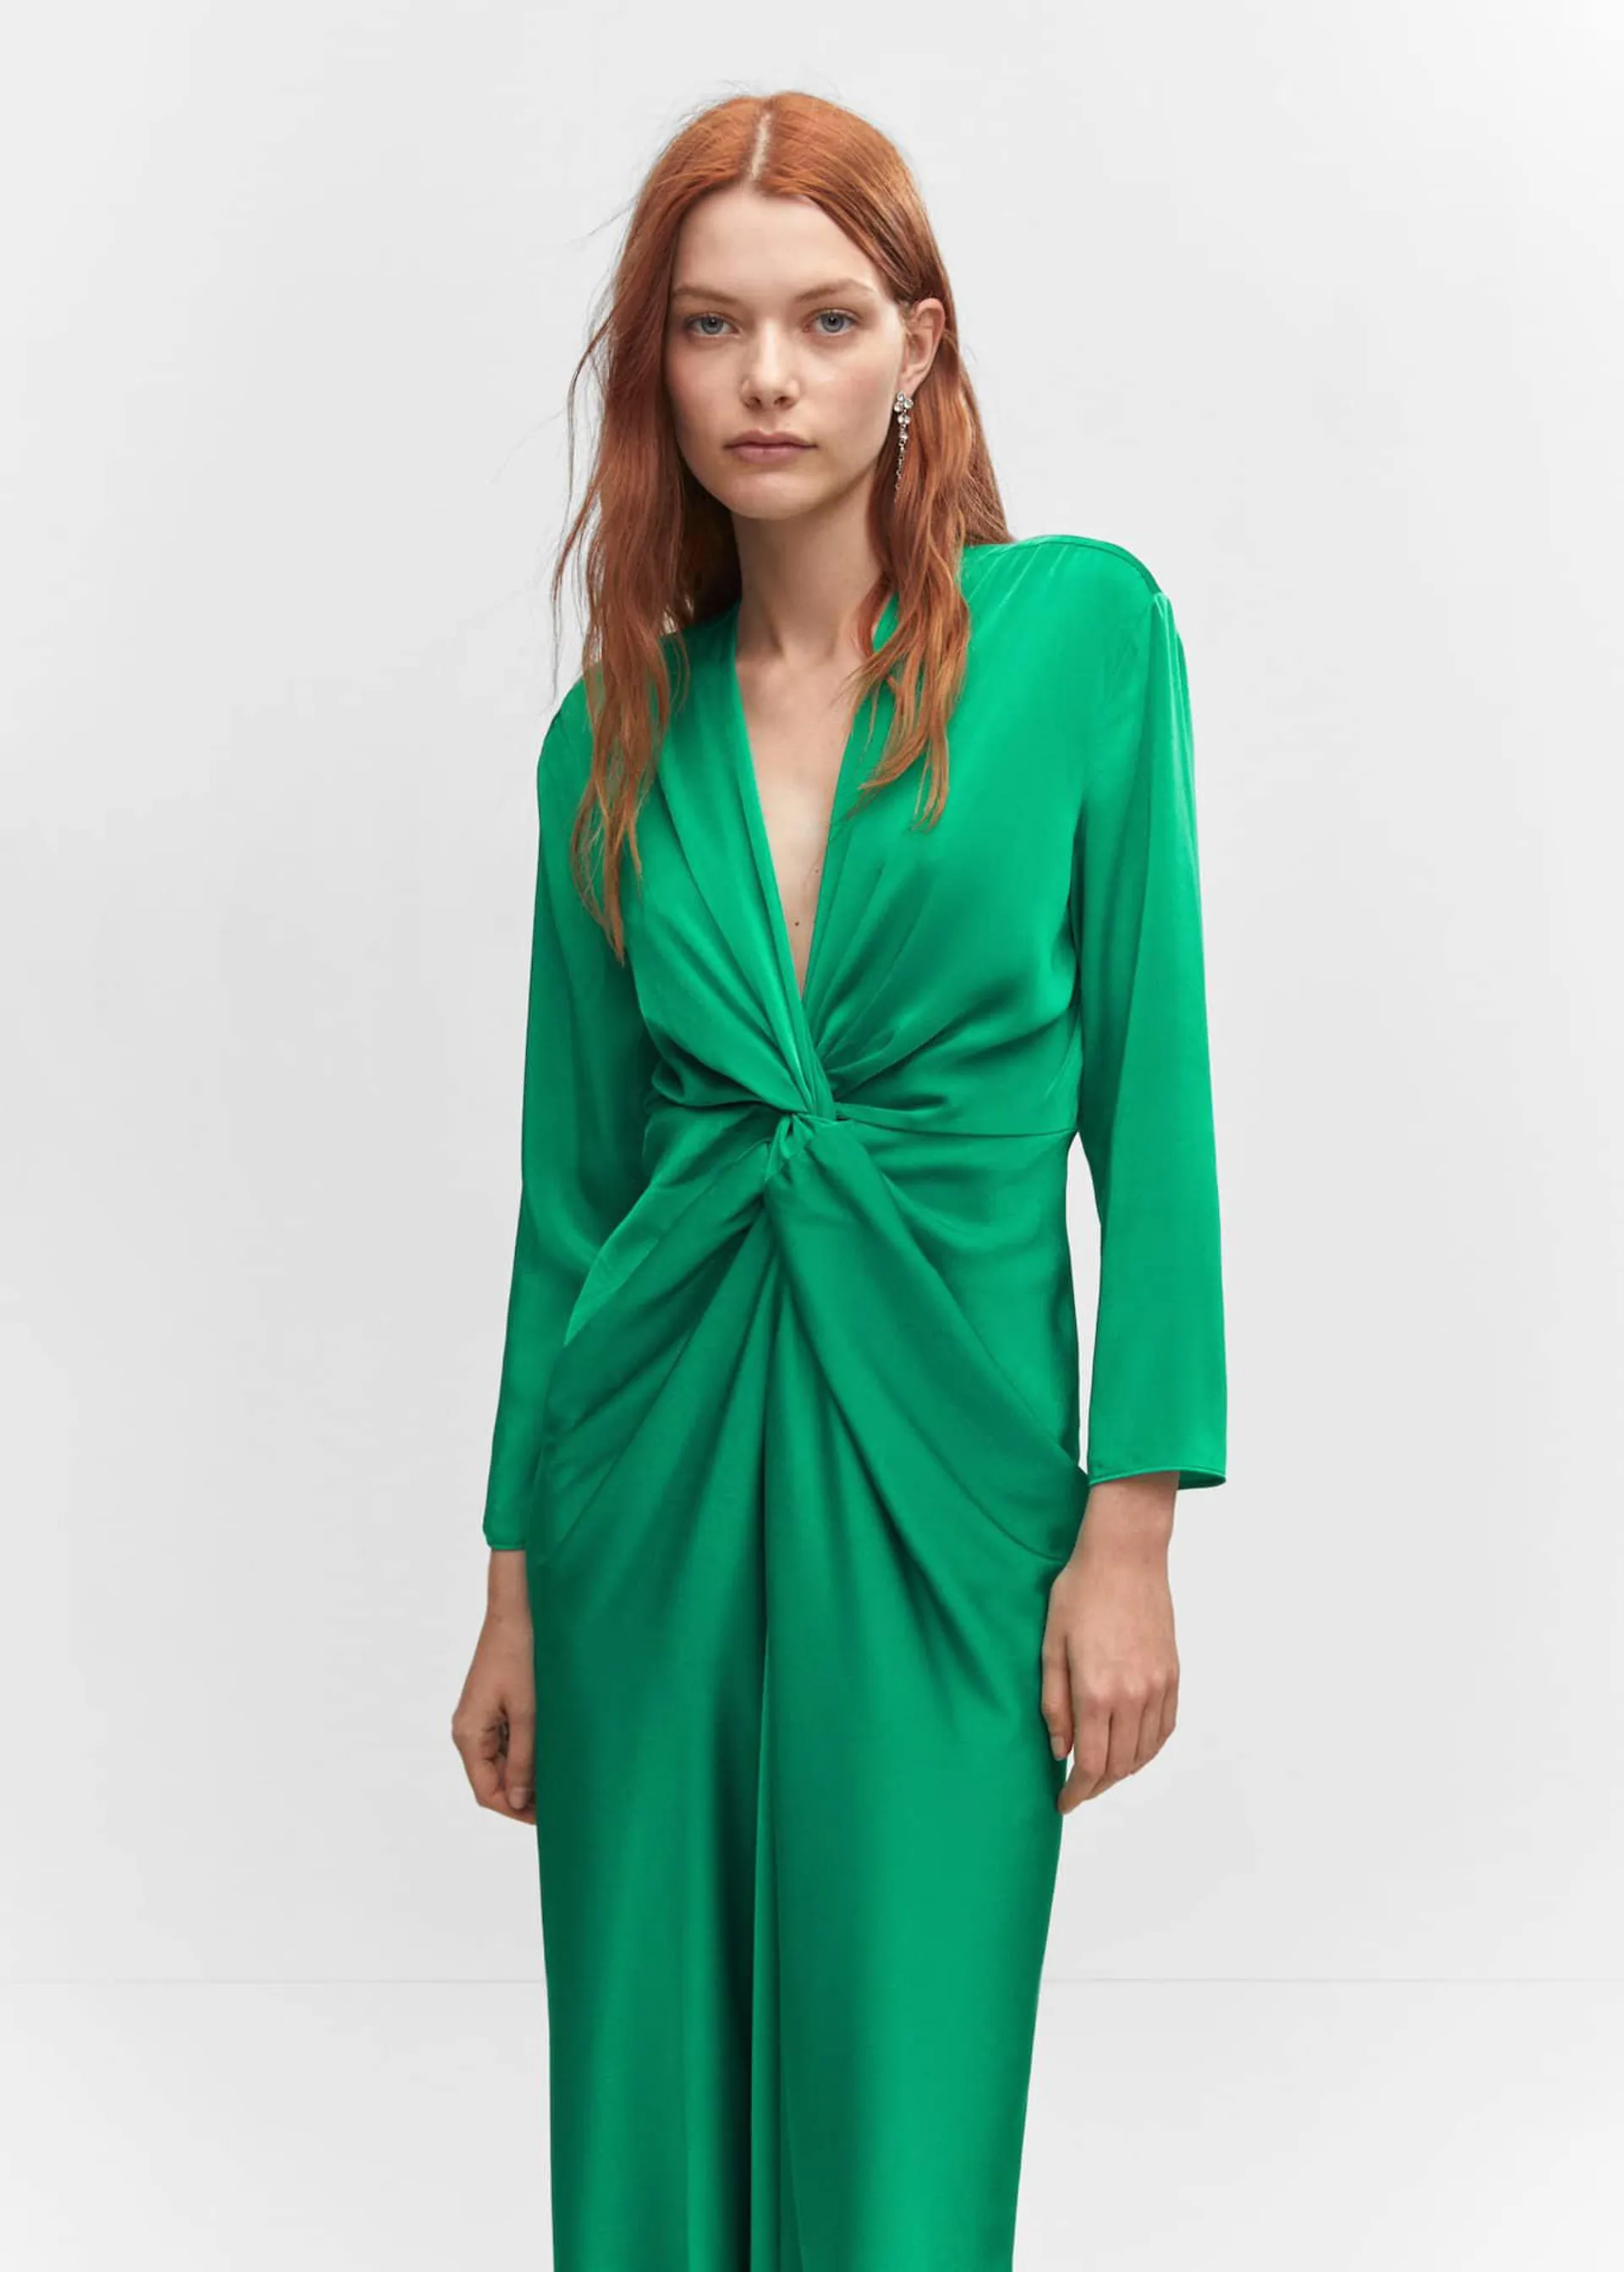 Satin dress with knot